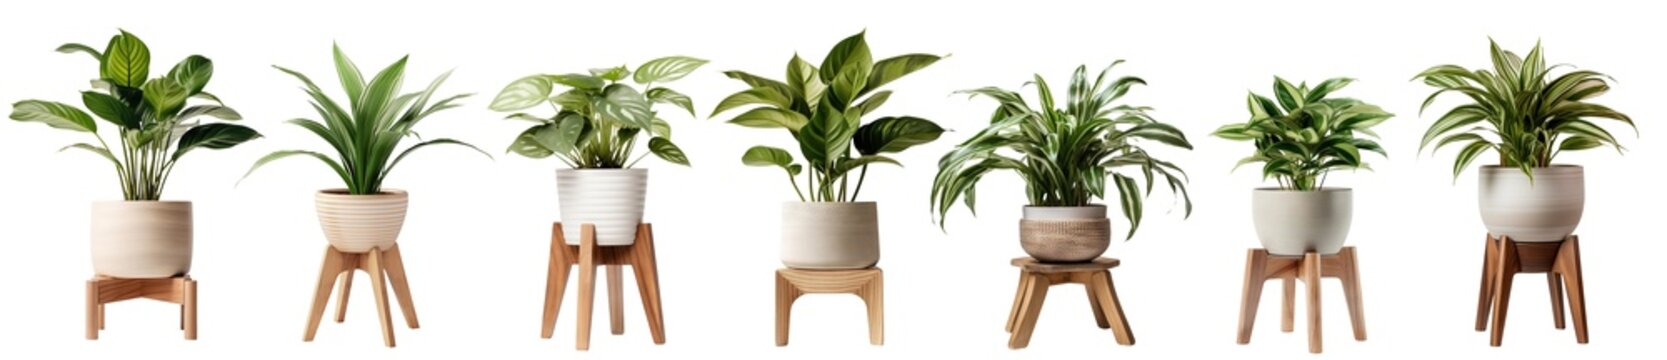 Fototapeta Set of indoor plants in pots on wooden stools, cut out